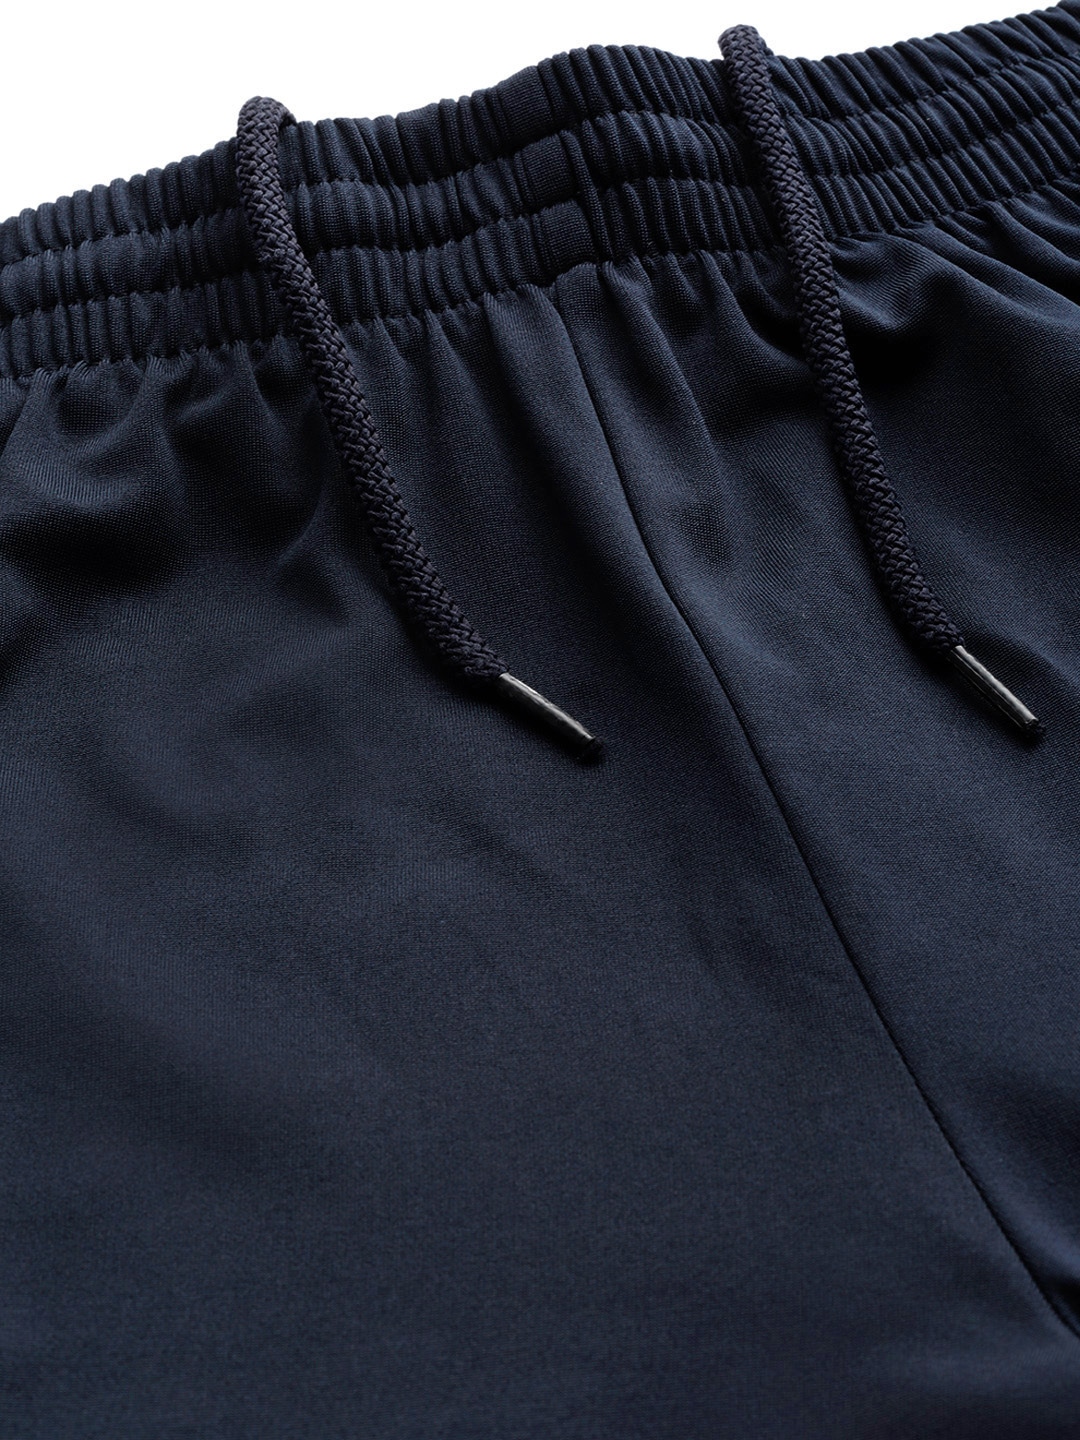 Clothing Tracksuits | OFF LIMITS Men Navy-Blue Solid Tracksuit - KV02536